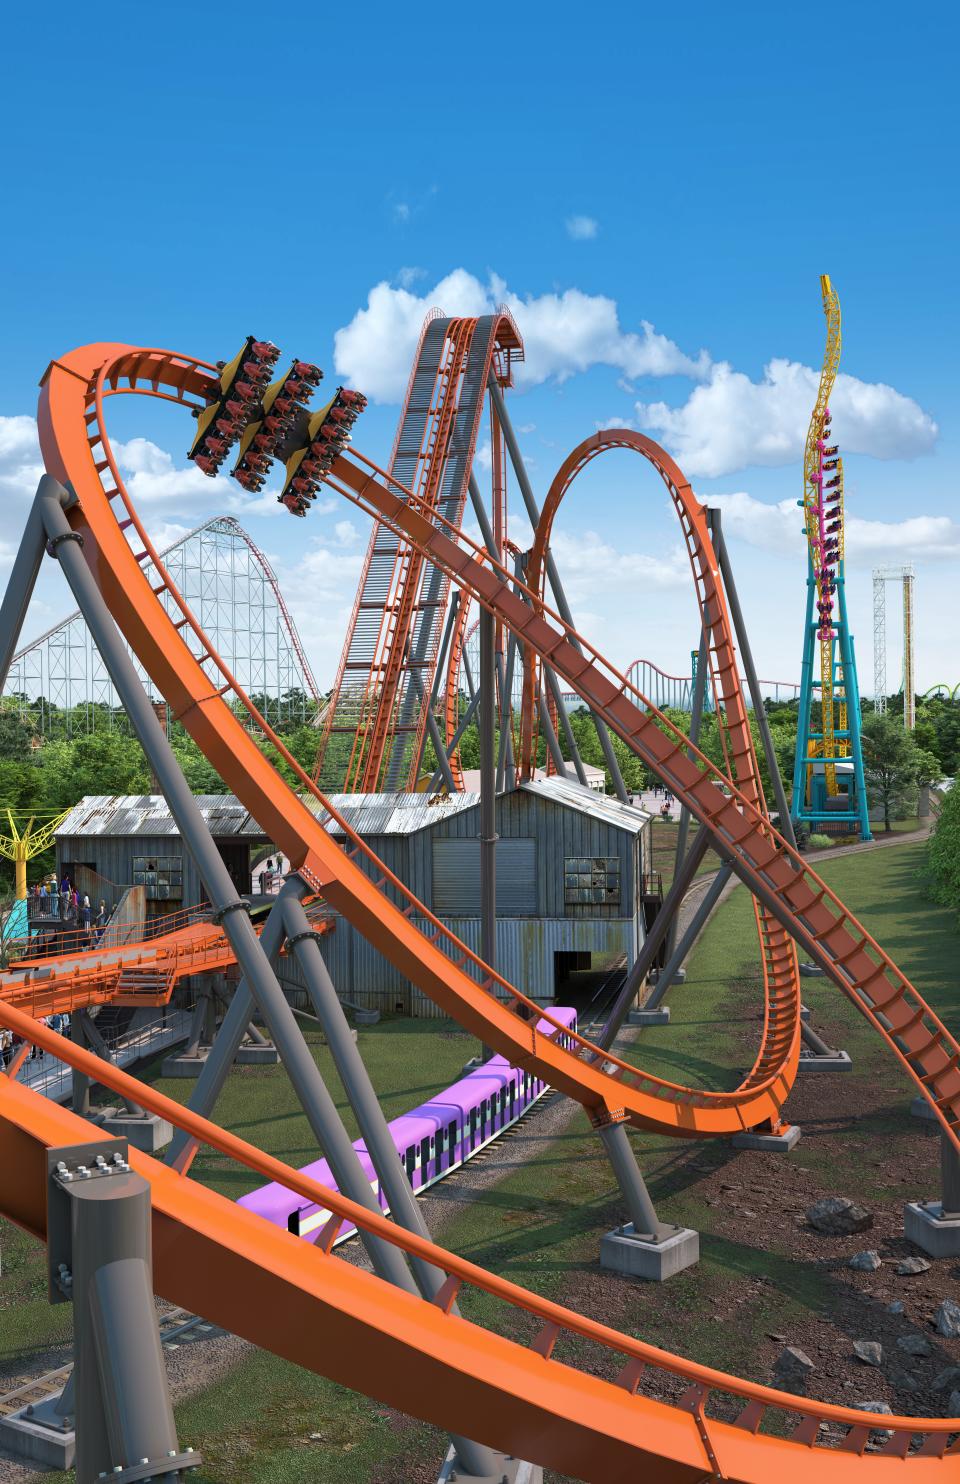 Dorney Park and Wildwater Kingdom's newest rollercoaster, "Iron Menace" features nearly 2,200 feet of steel track, a 160-ft. rise, several loops and an innovate "hold and dive" feature that suspends riders before experiencing a 95-degree, 152-ft. drop. Iron Menace will open in the 2024 season.